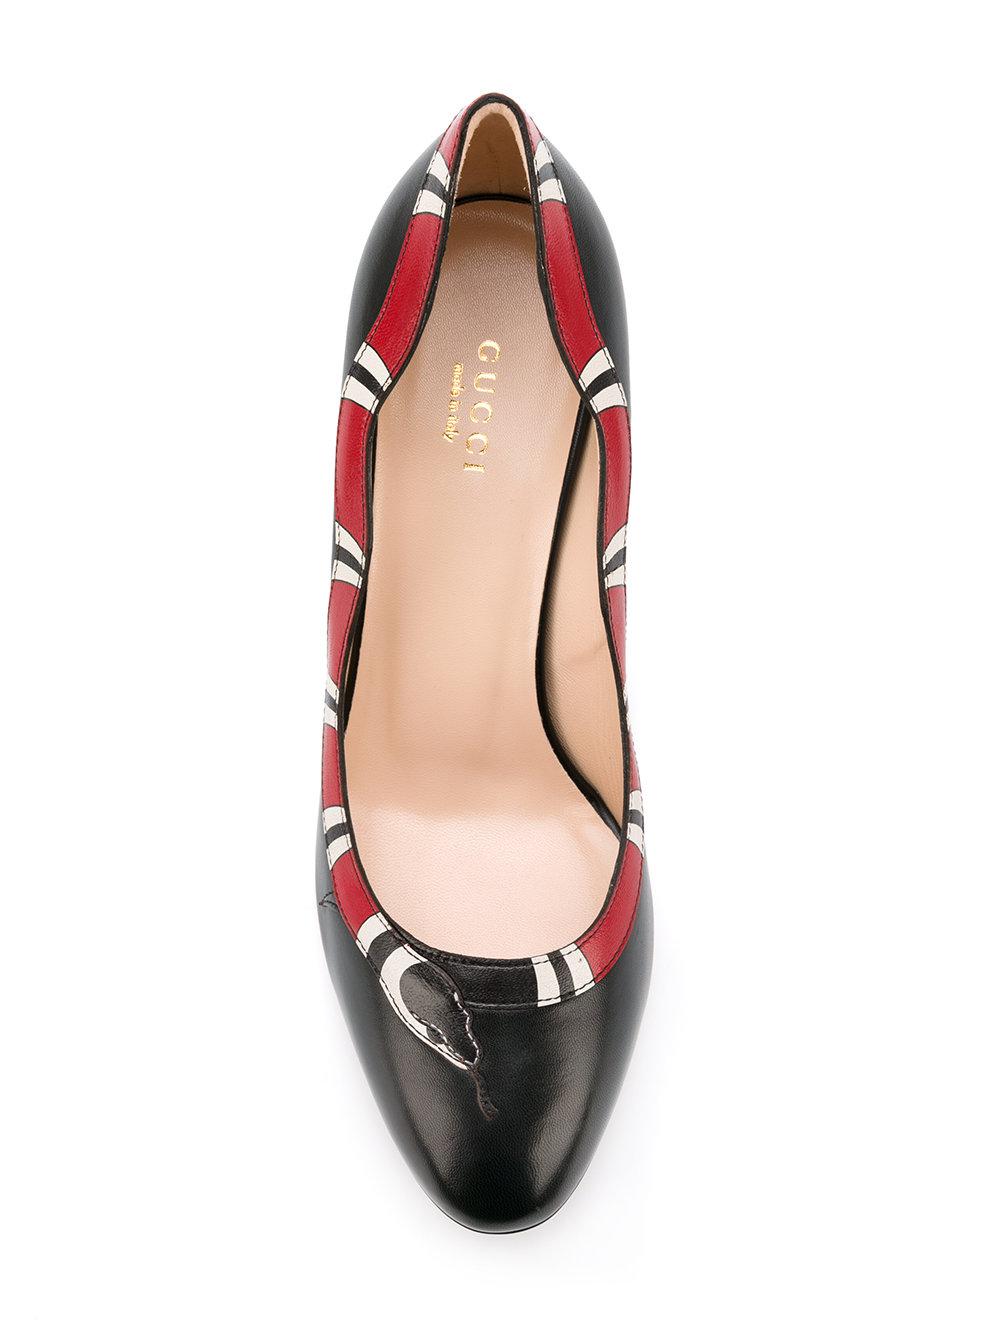 Gucci Leather Kingsnake Pumps in Black | Lyst